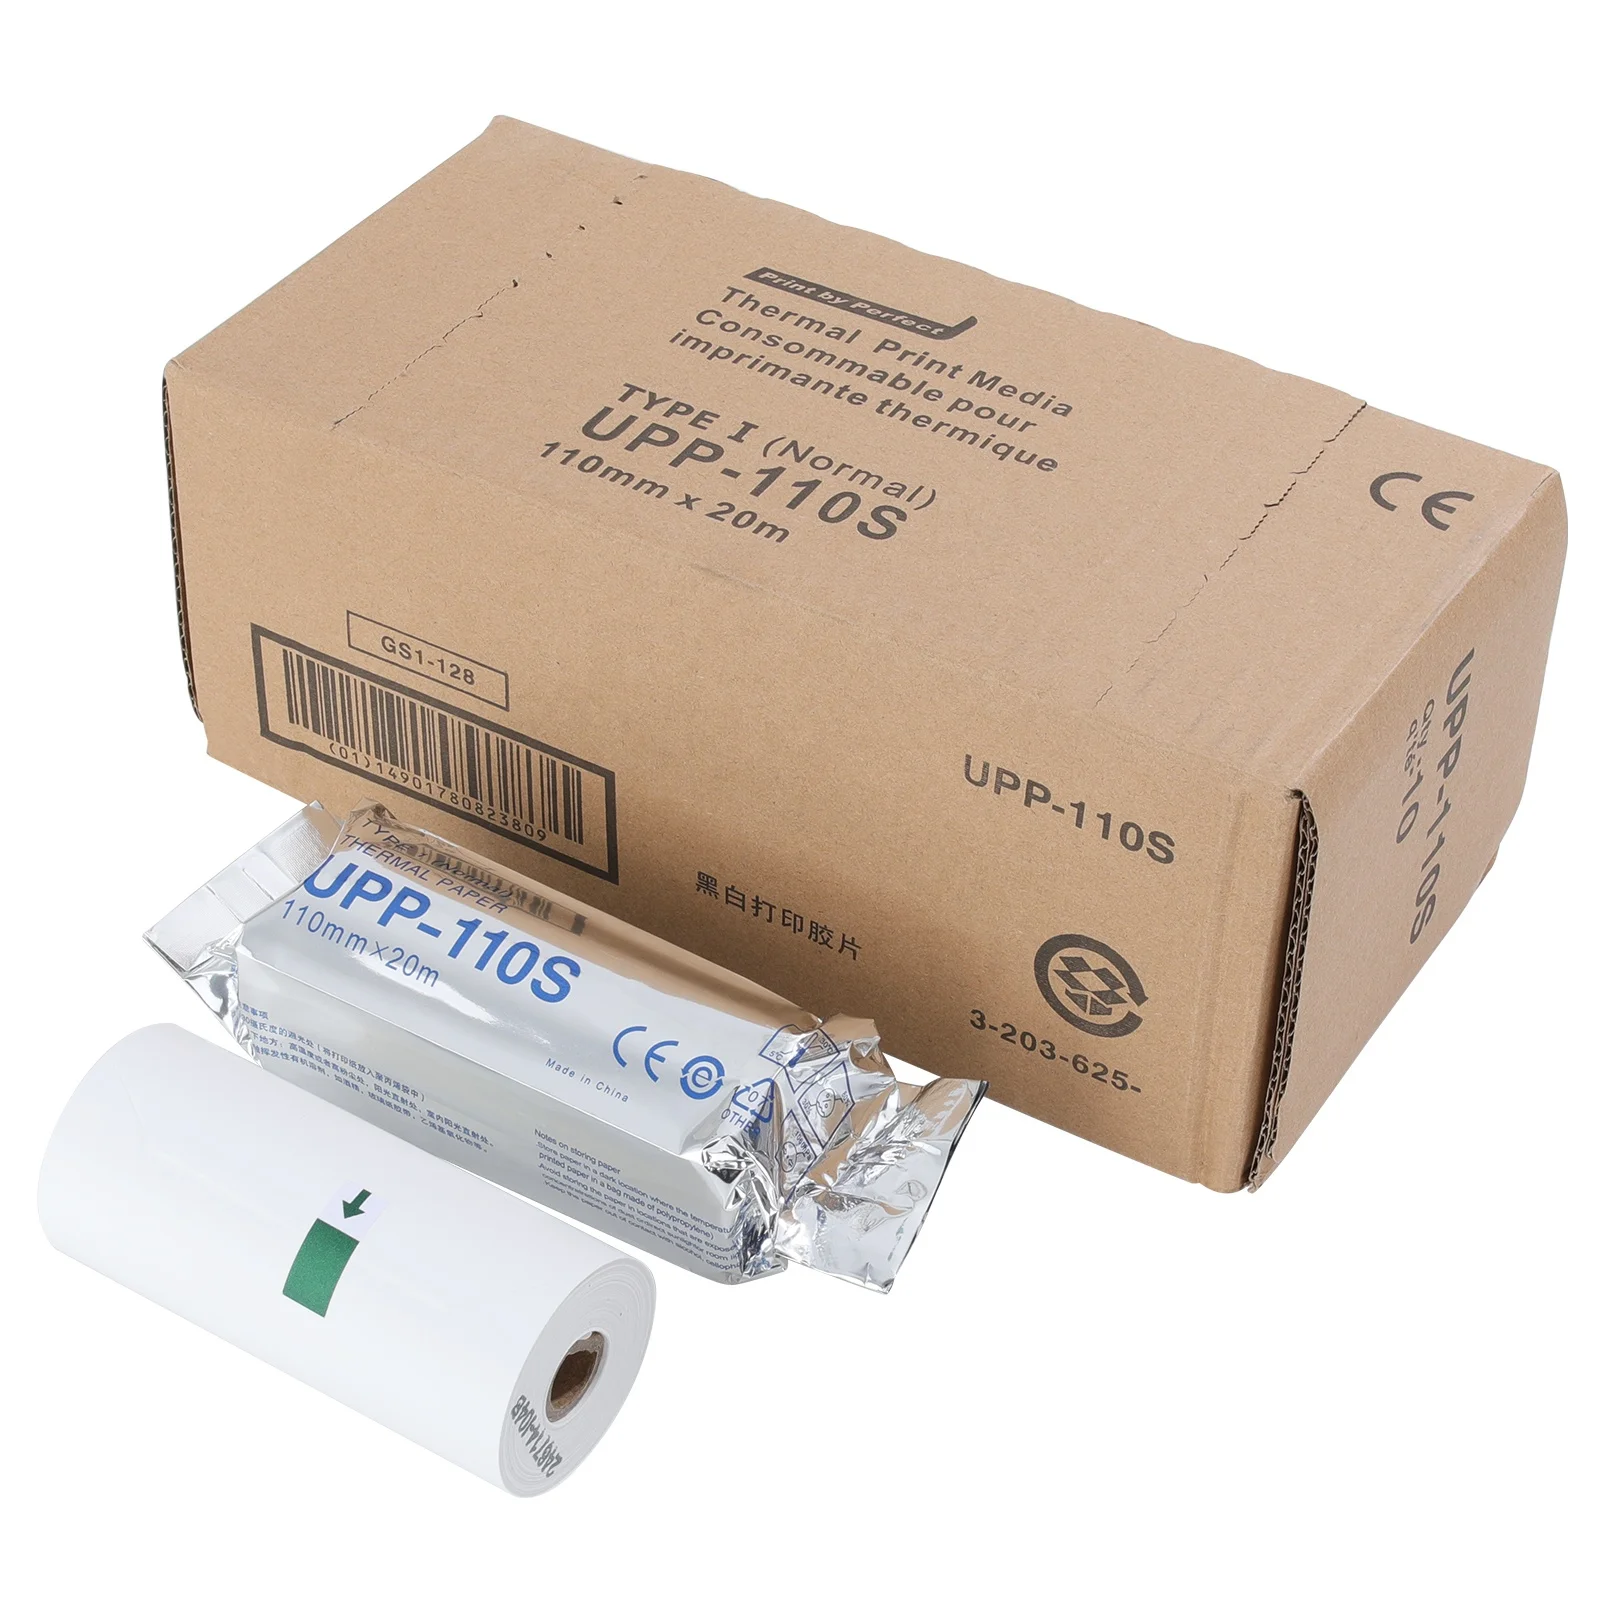 
Ultrasonography Paper UPP-110S Ultrasound Thermal Roll for Sony Printer 